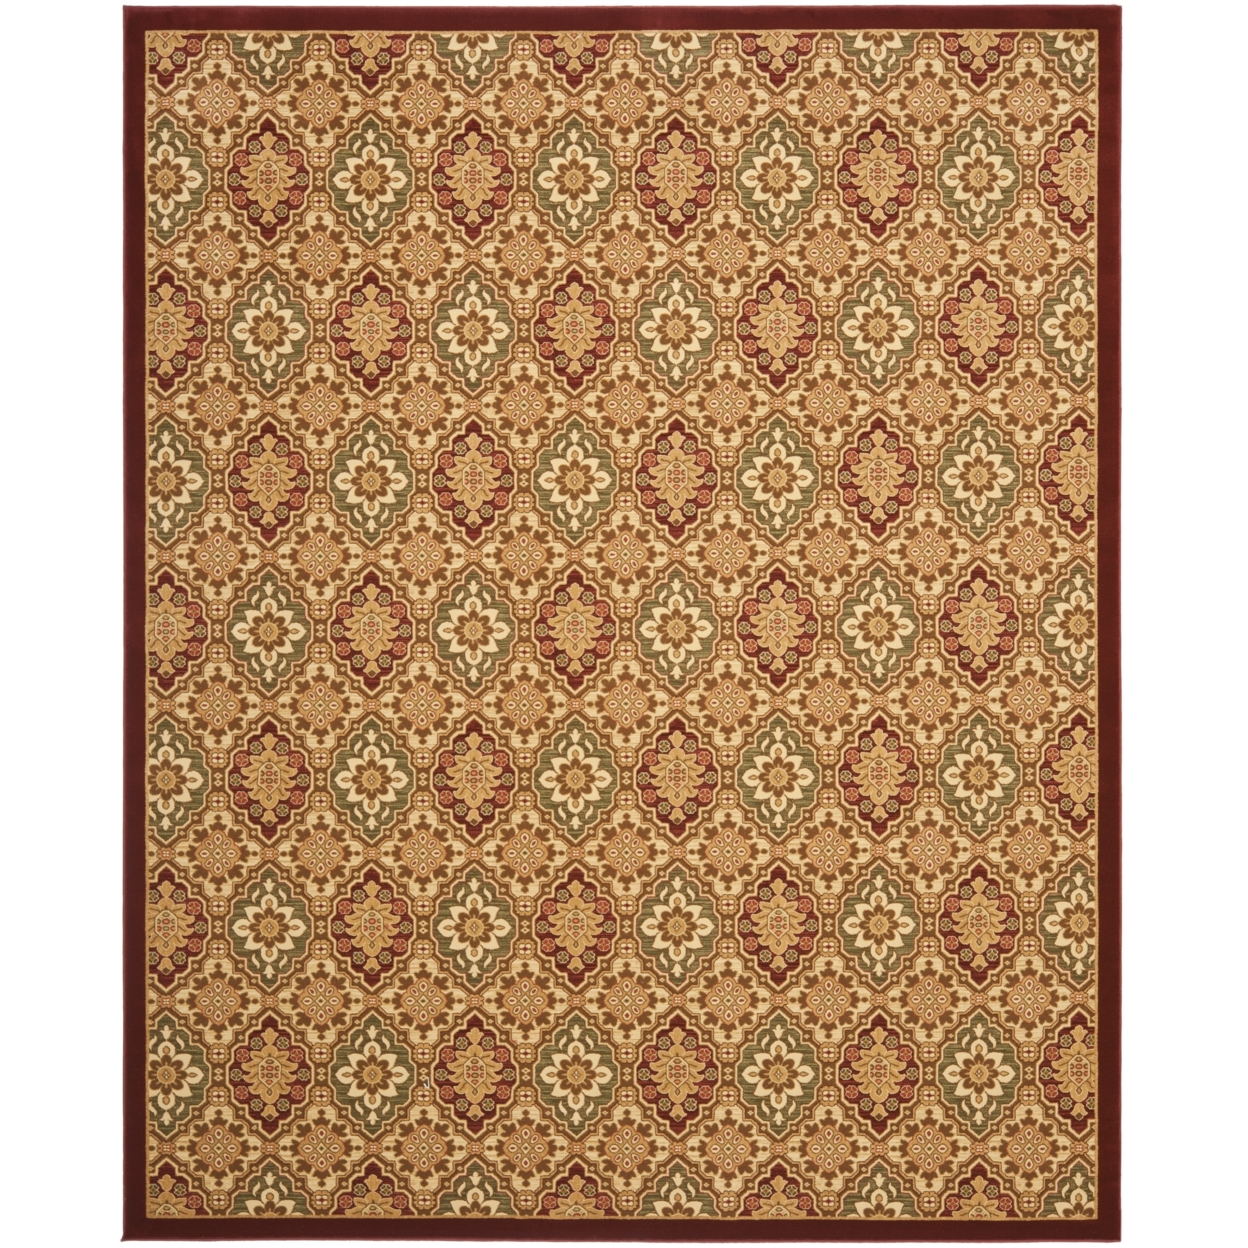 SAFAVIEH Treasures Collection TRE217-4012 Red / Ivory Rug - 4' X 6'